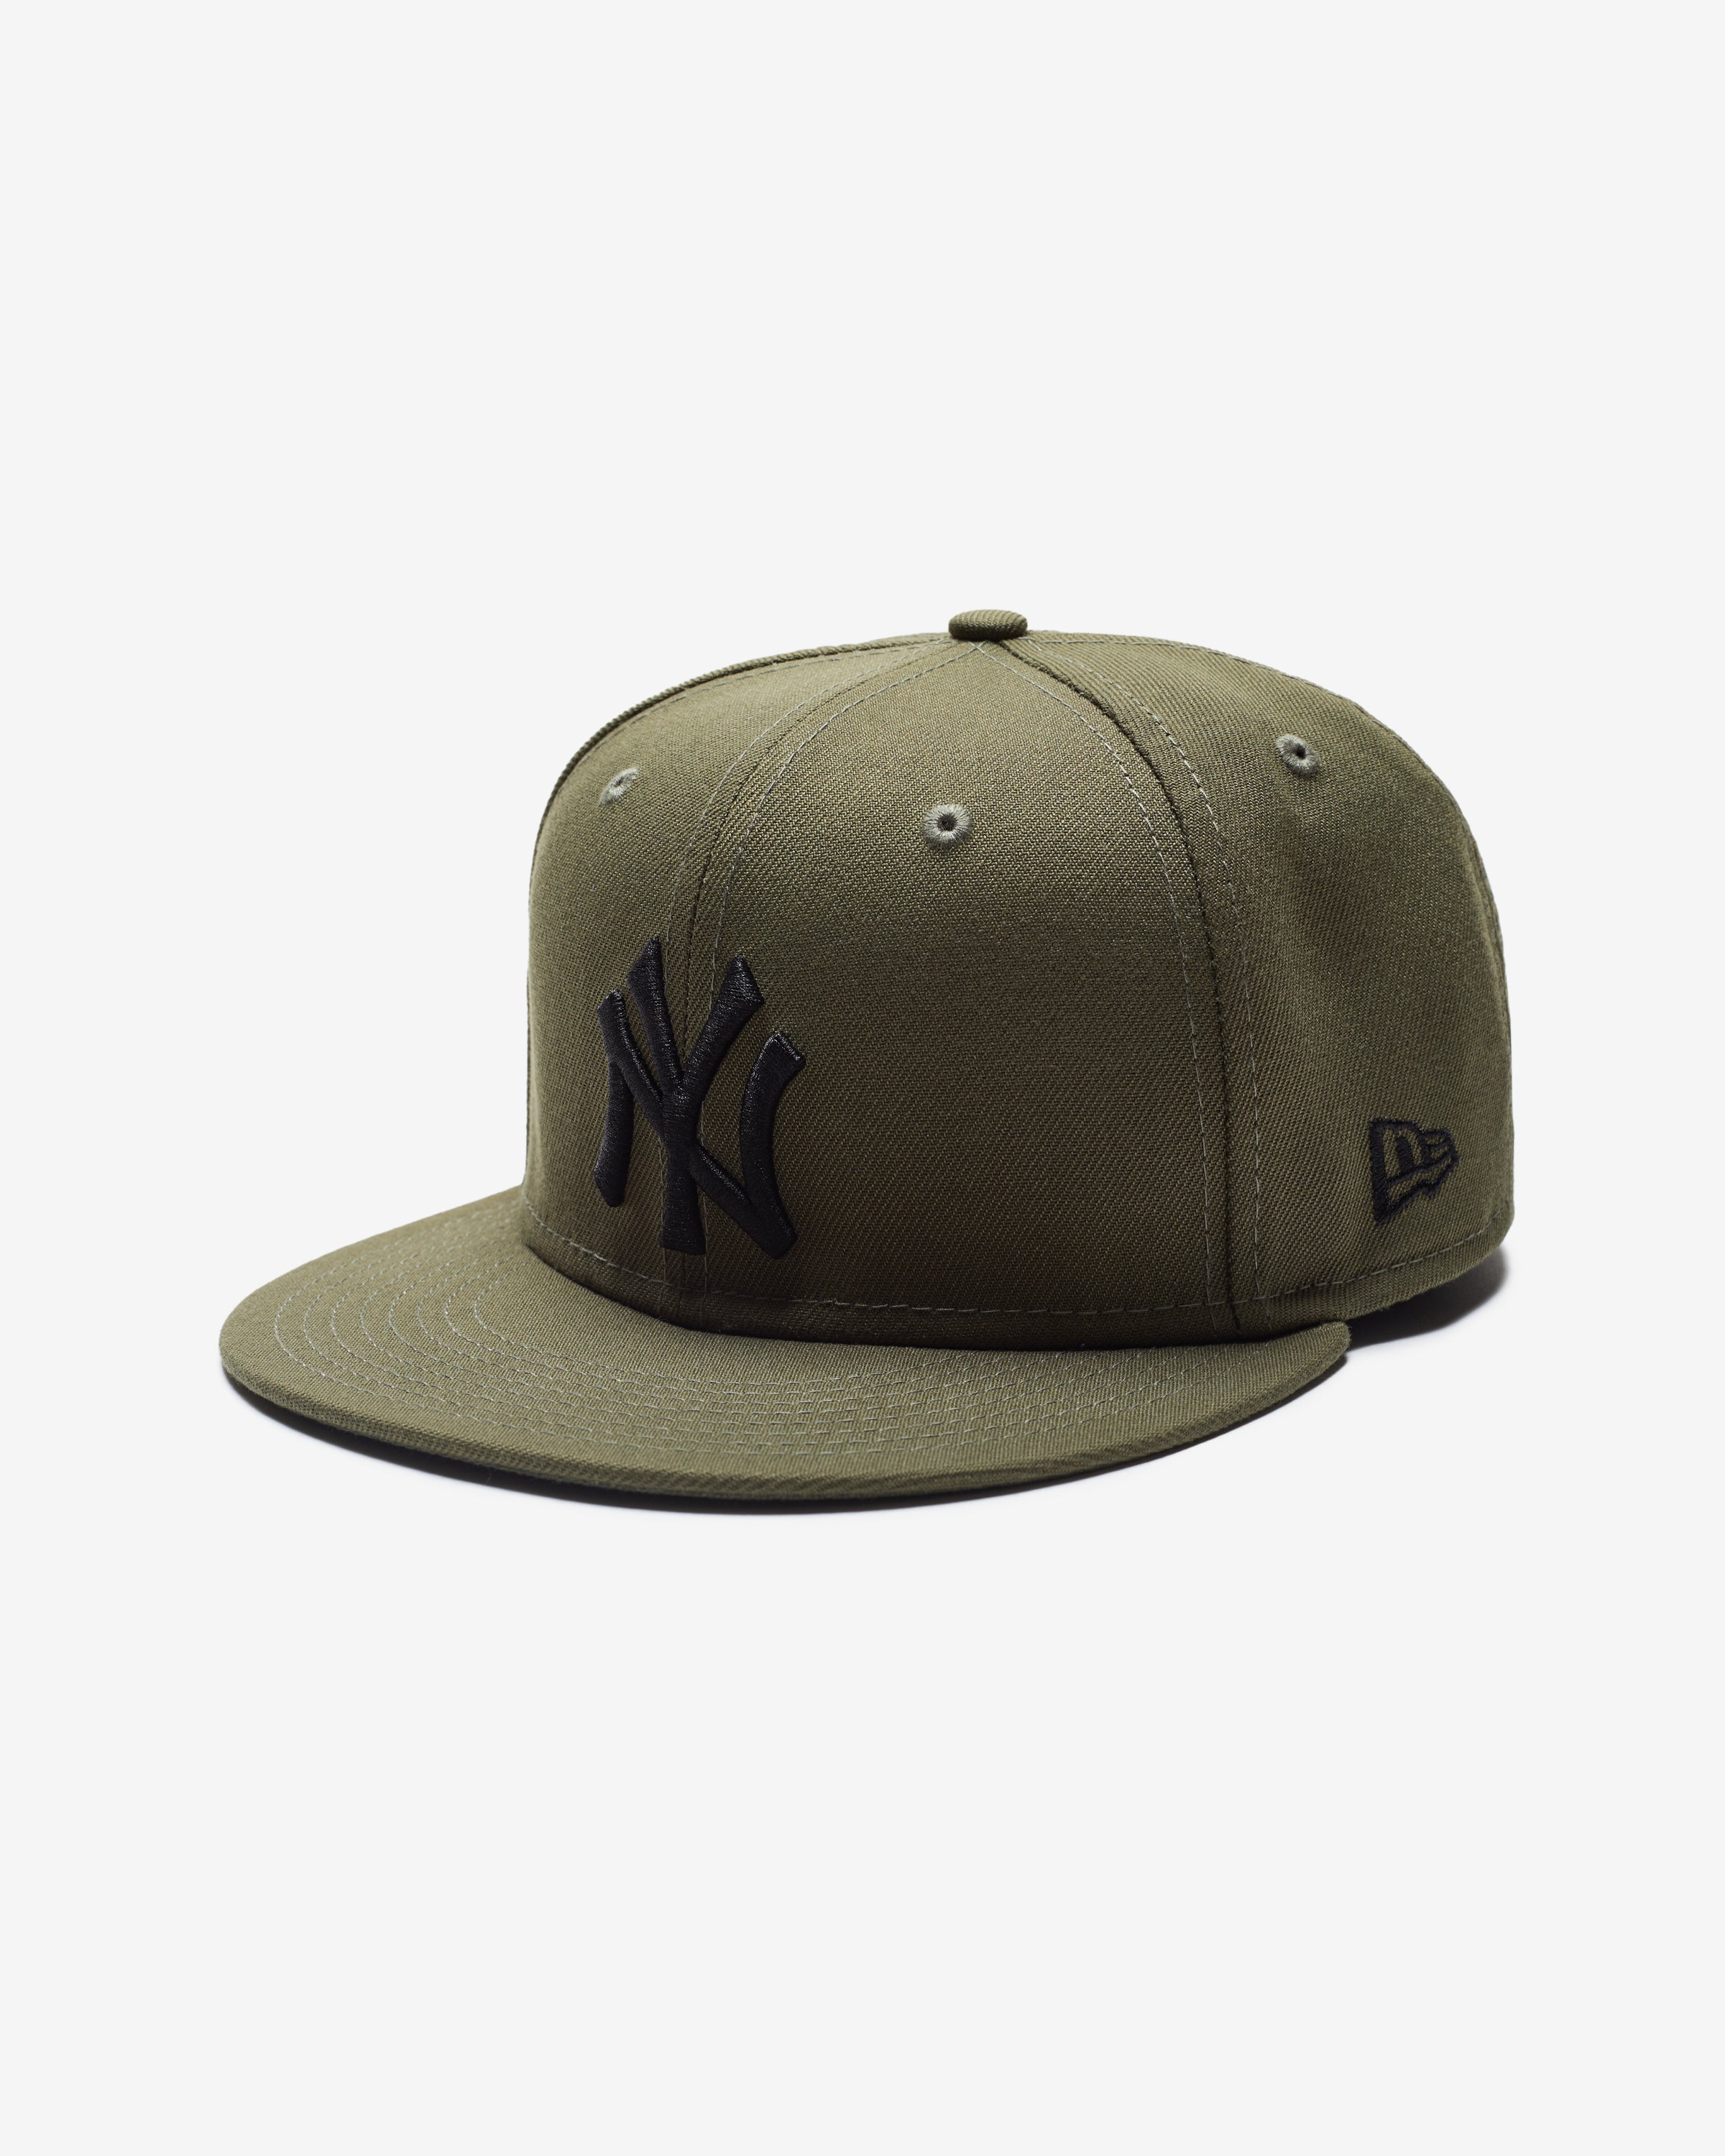 UNDEFEATED X NEW ERA NY YANKEES 59FIFTY FITTED ...